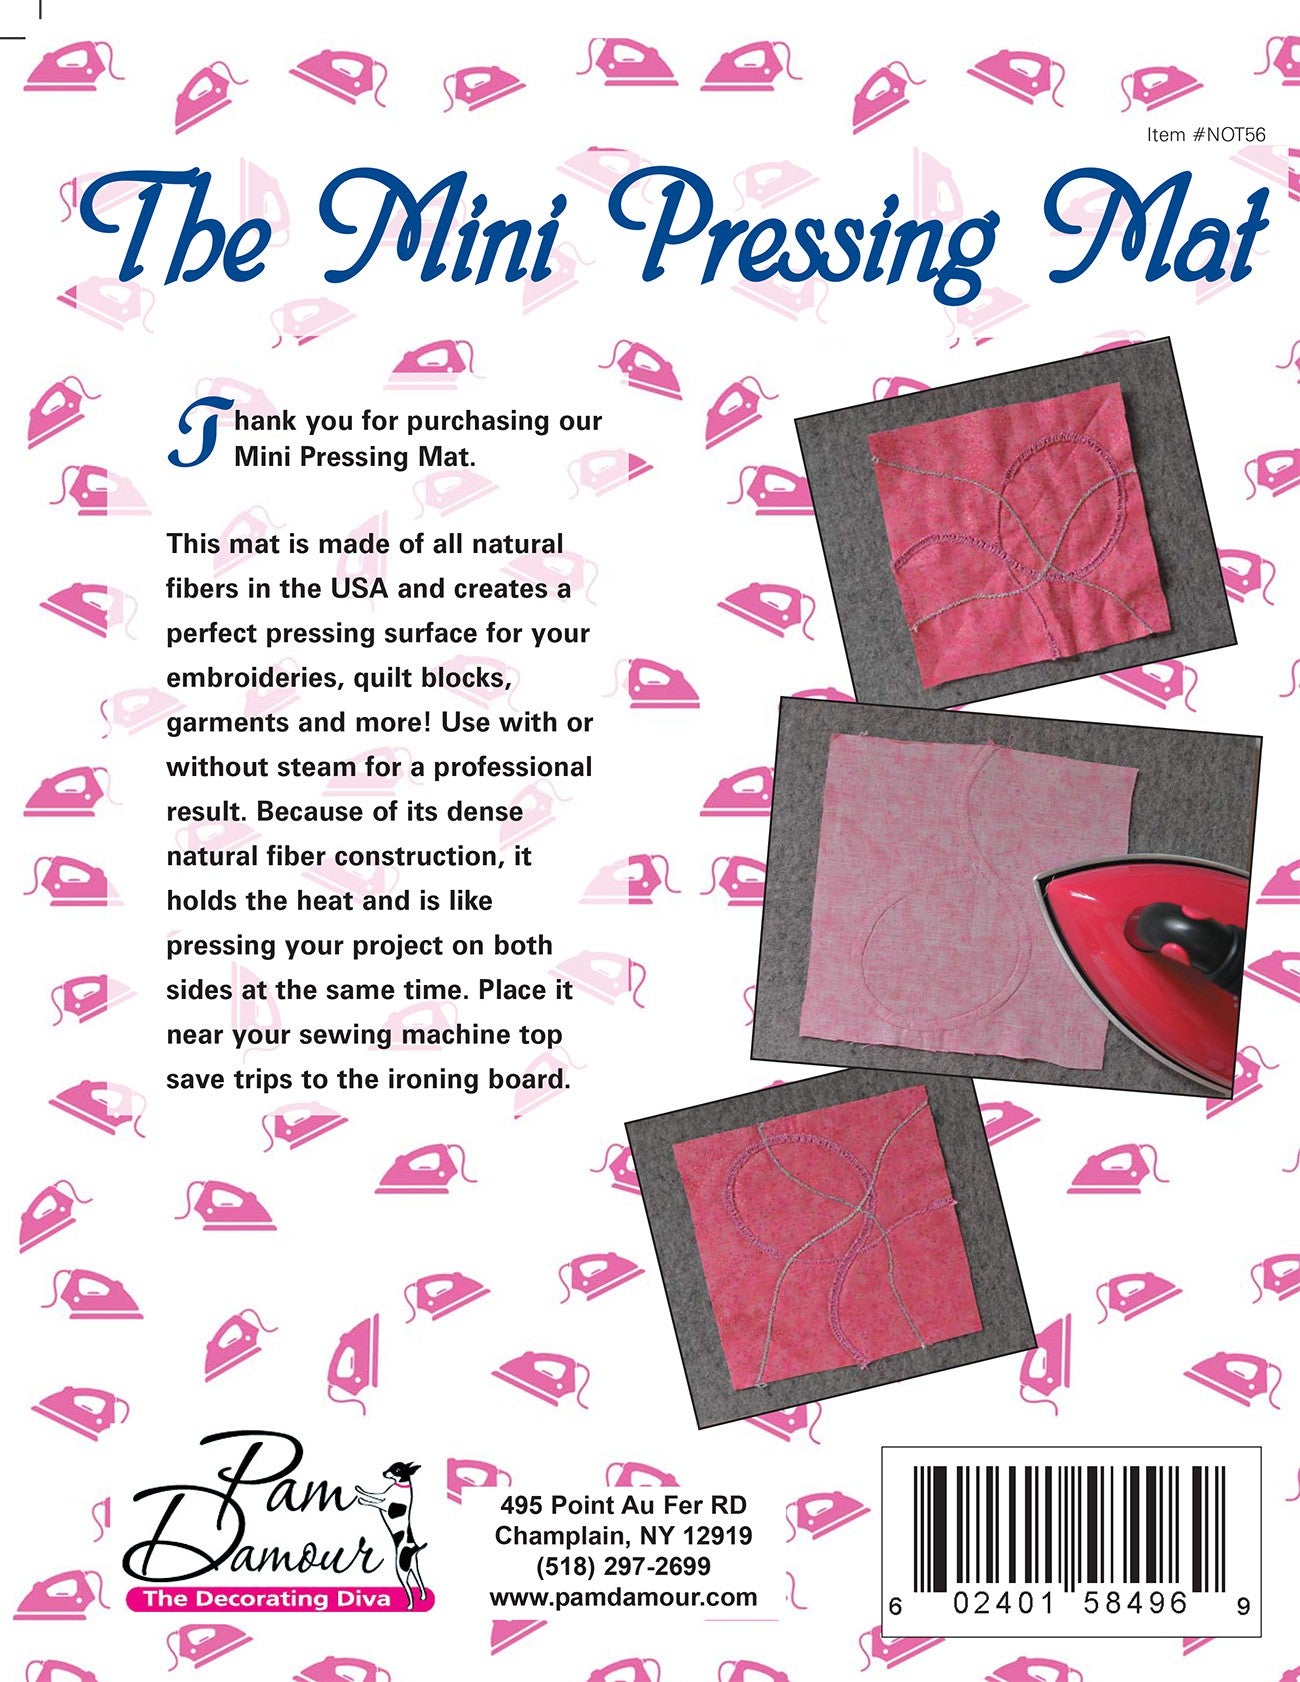 Mini Pressing Mat 9-Inches x 12-Inches by Pam Damour The Decorating Diva